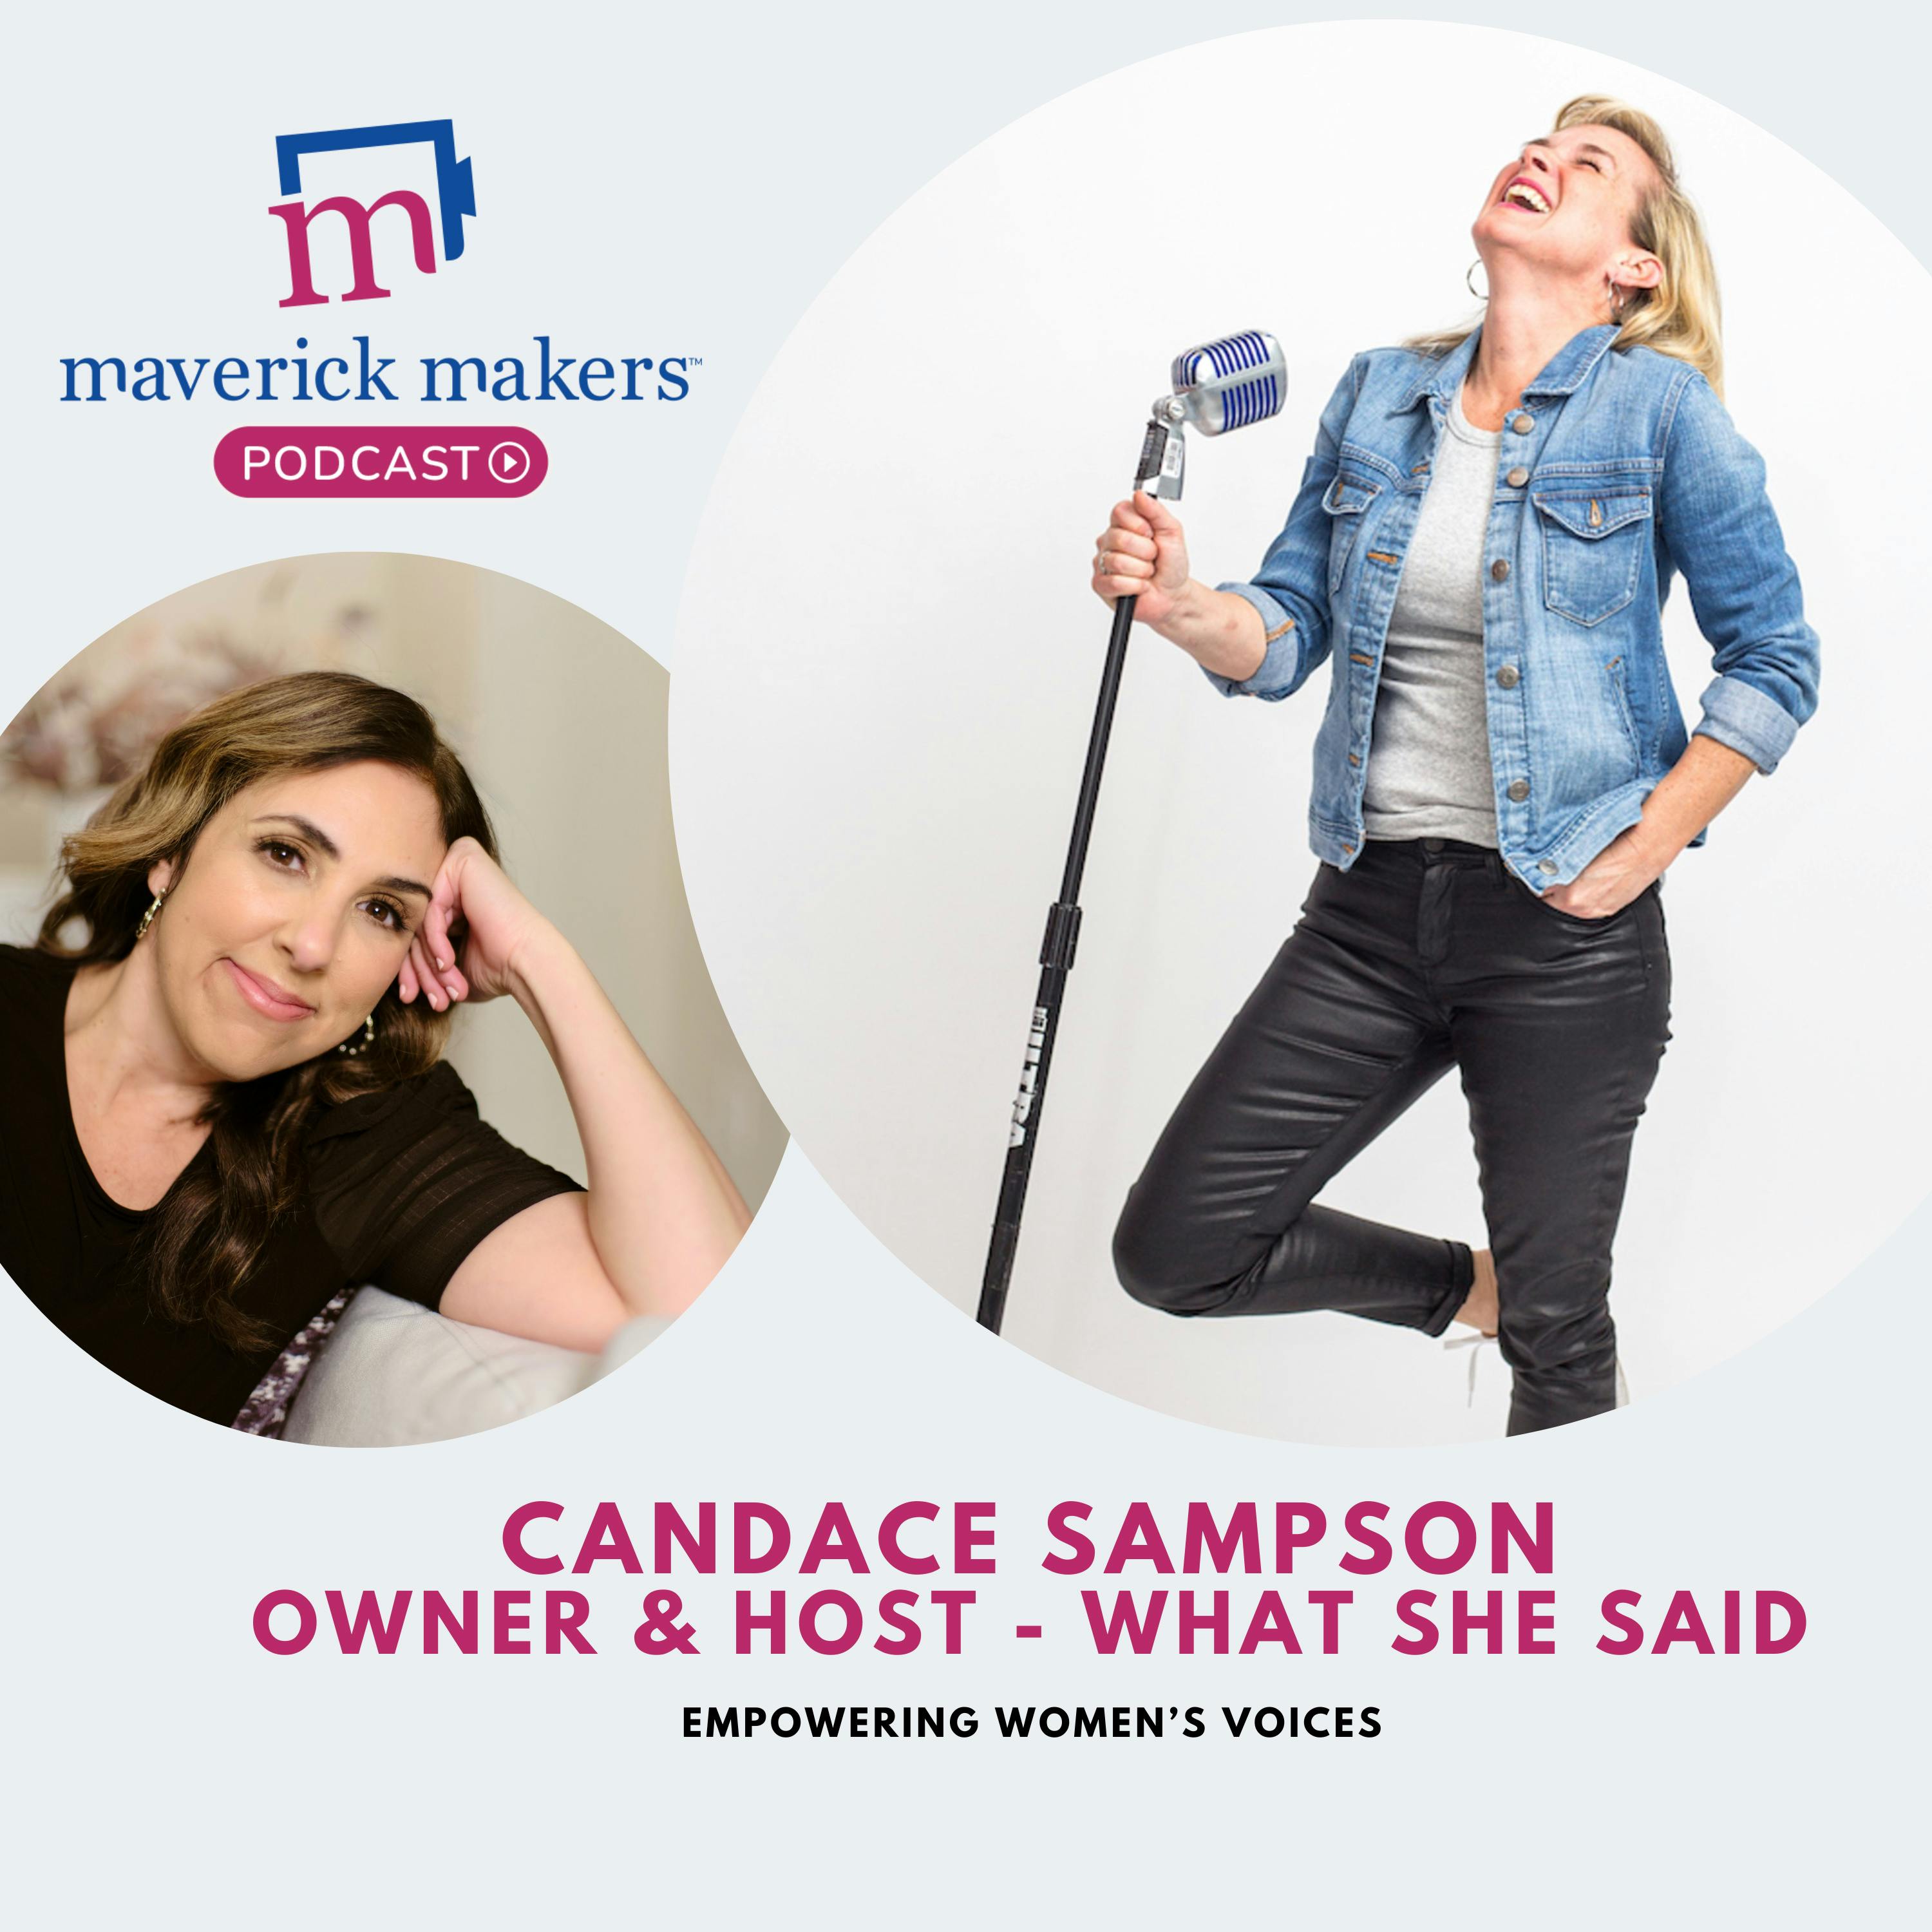 Candace Sampson: Empowering Women's Voices